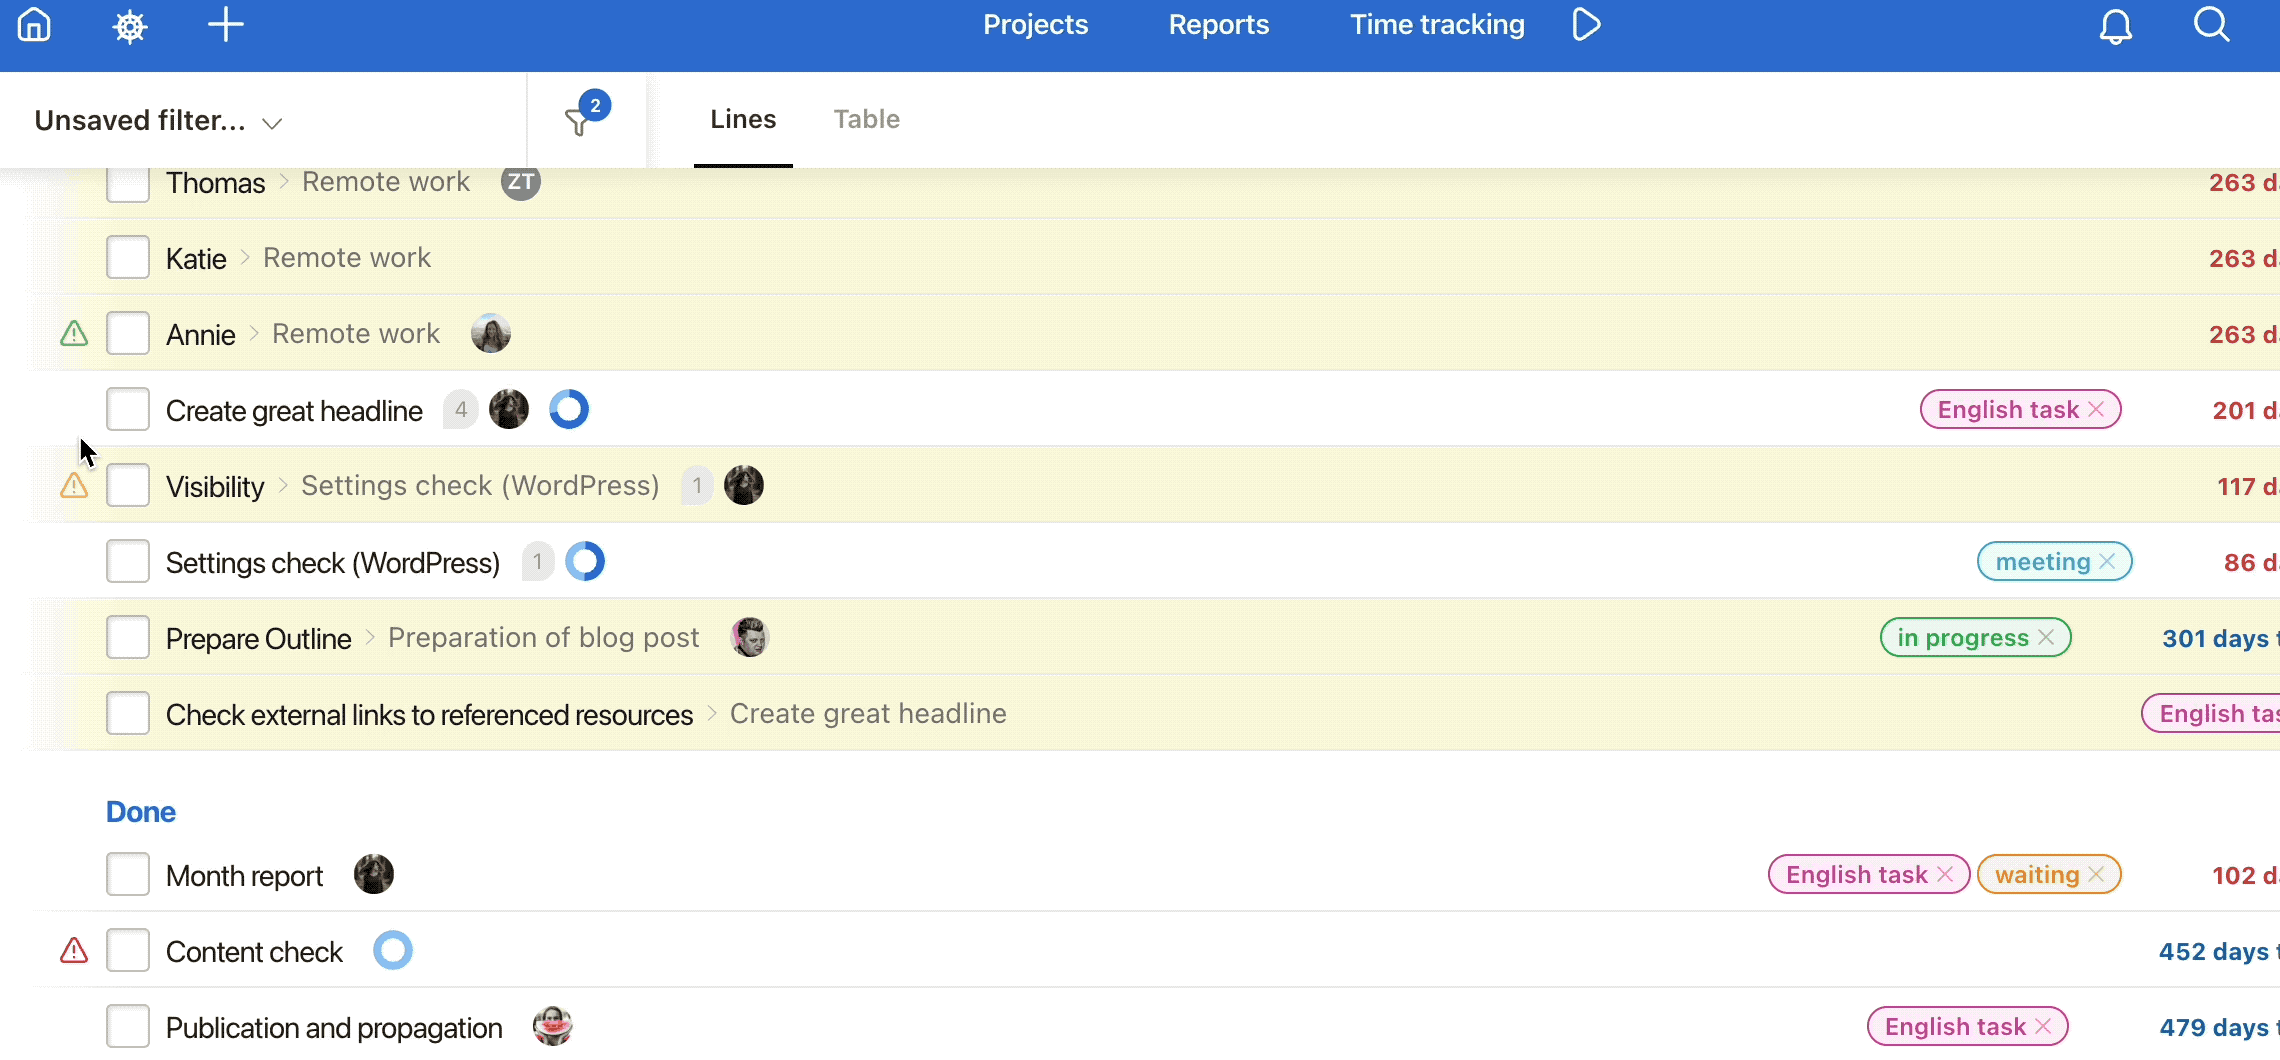 How to add a task to My task priorities on Dashboard.